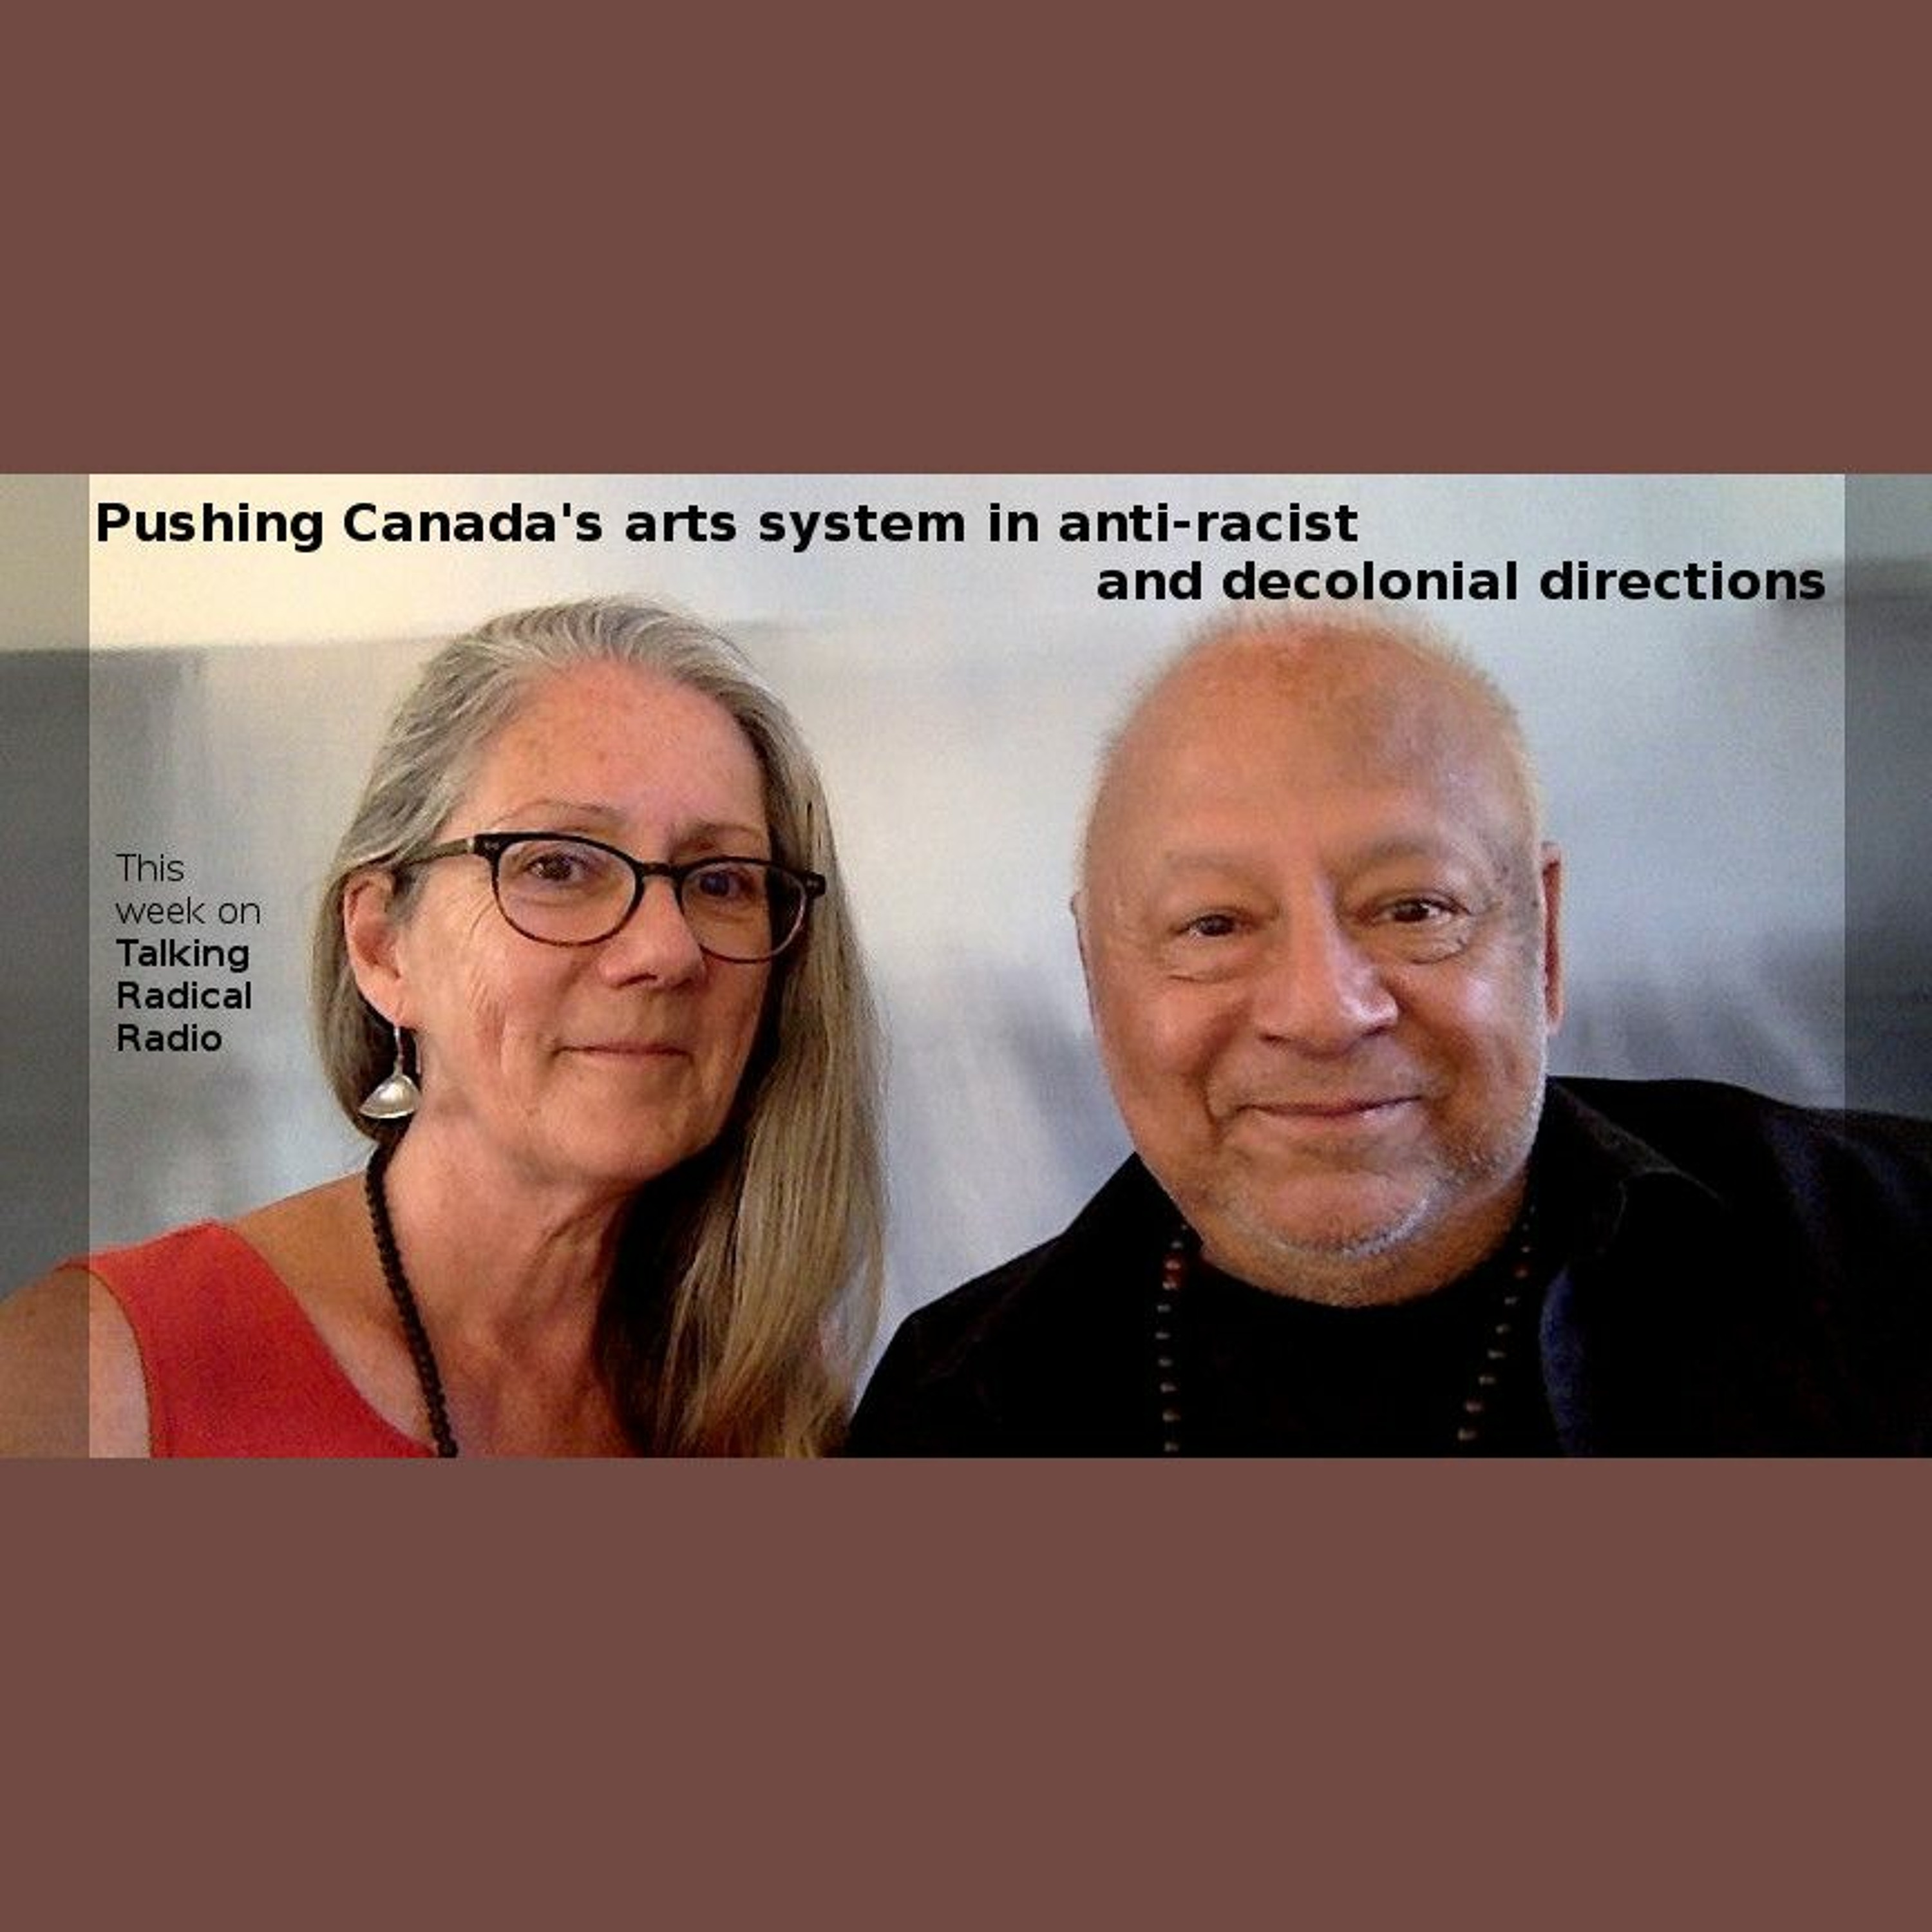 Pushing Canada's arts system in anti-racist and decolonial directions